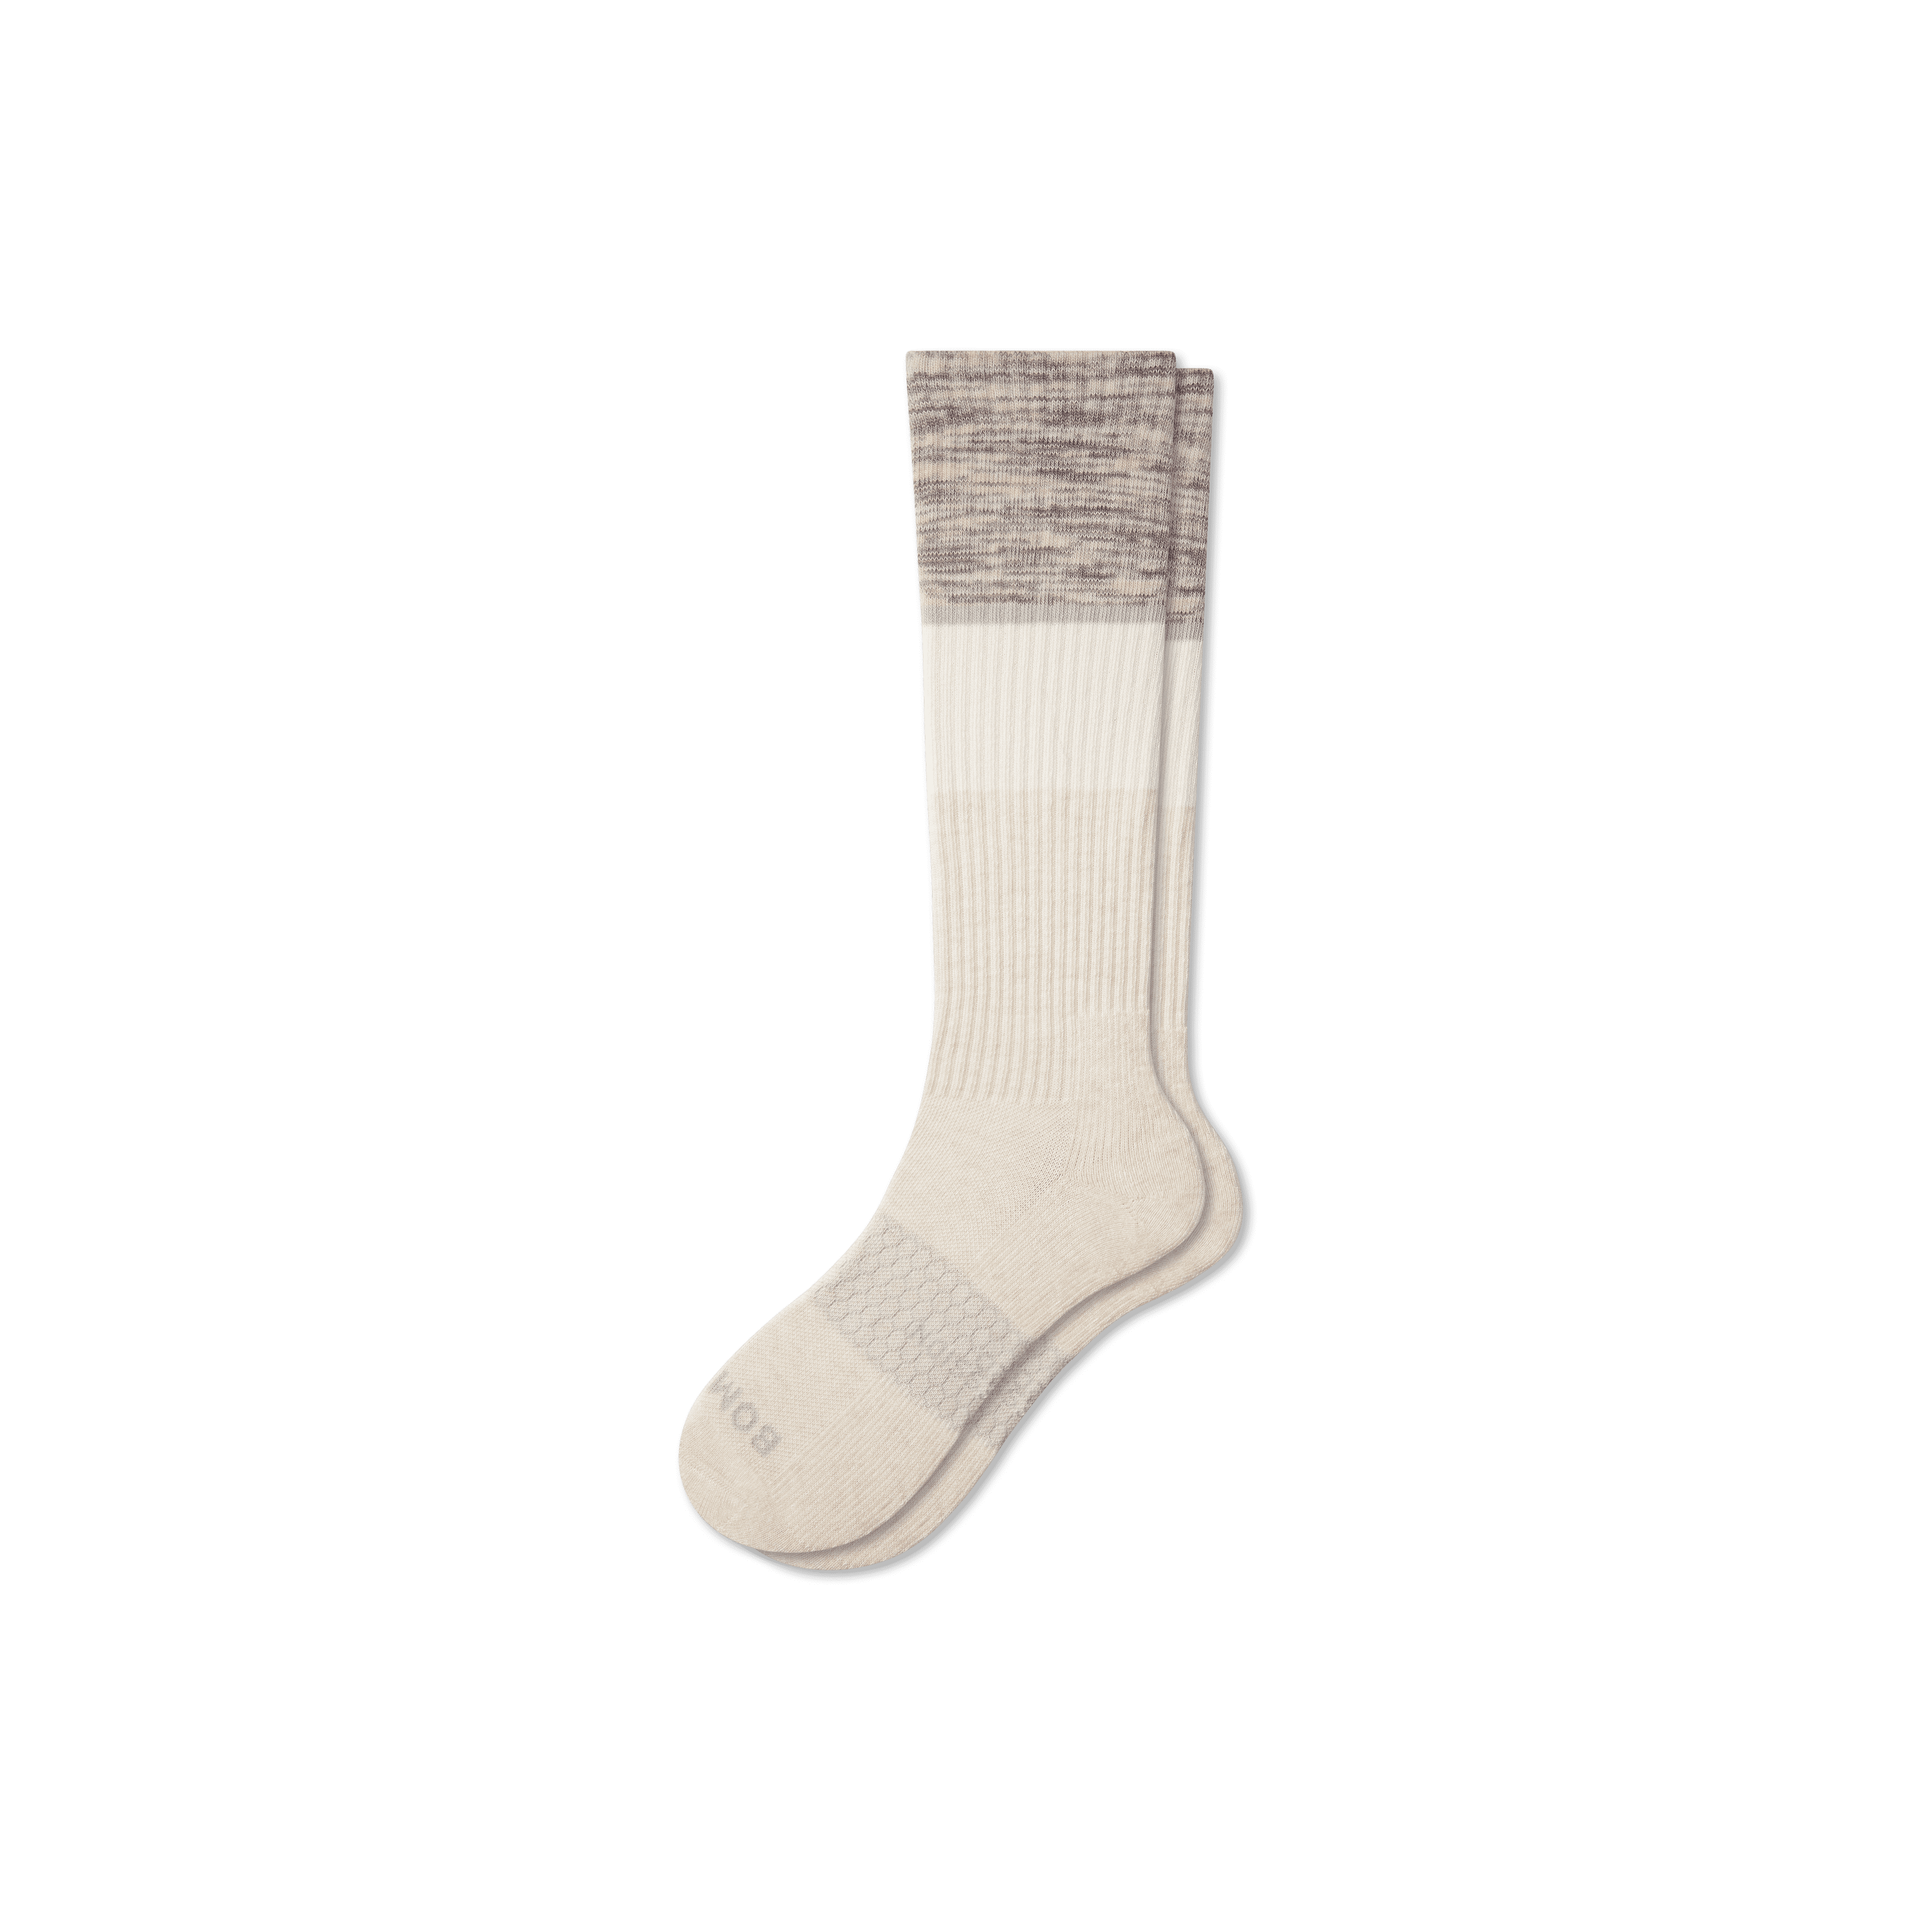 Bombas Everyday Compression Socks (15-20mmhg) In Natural Ivory